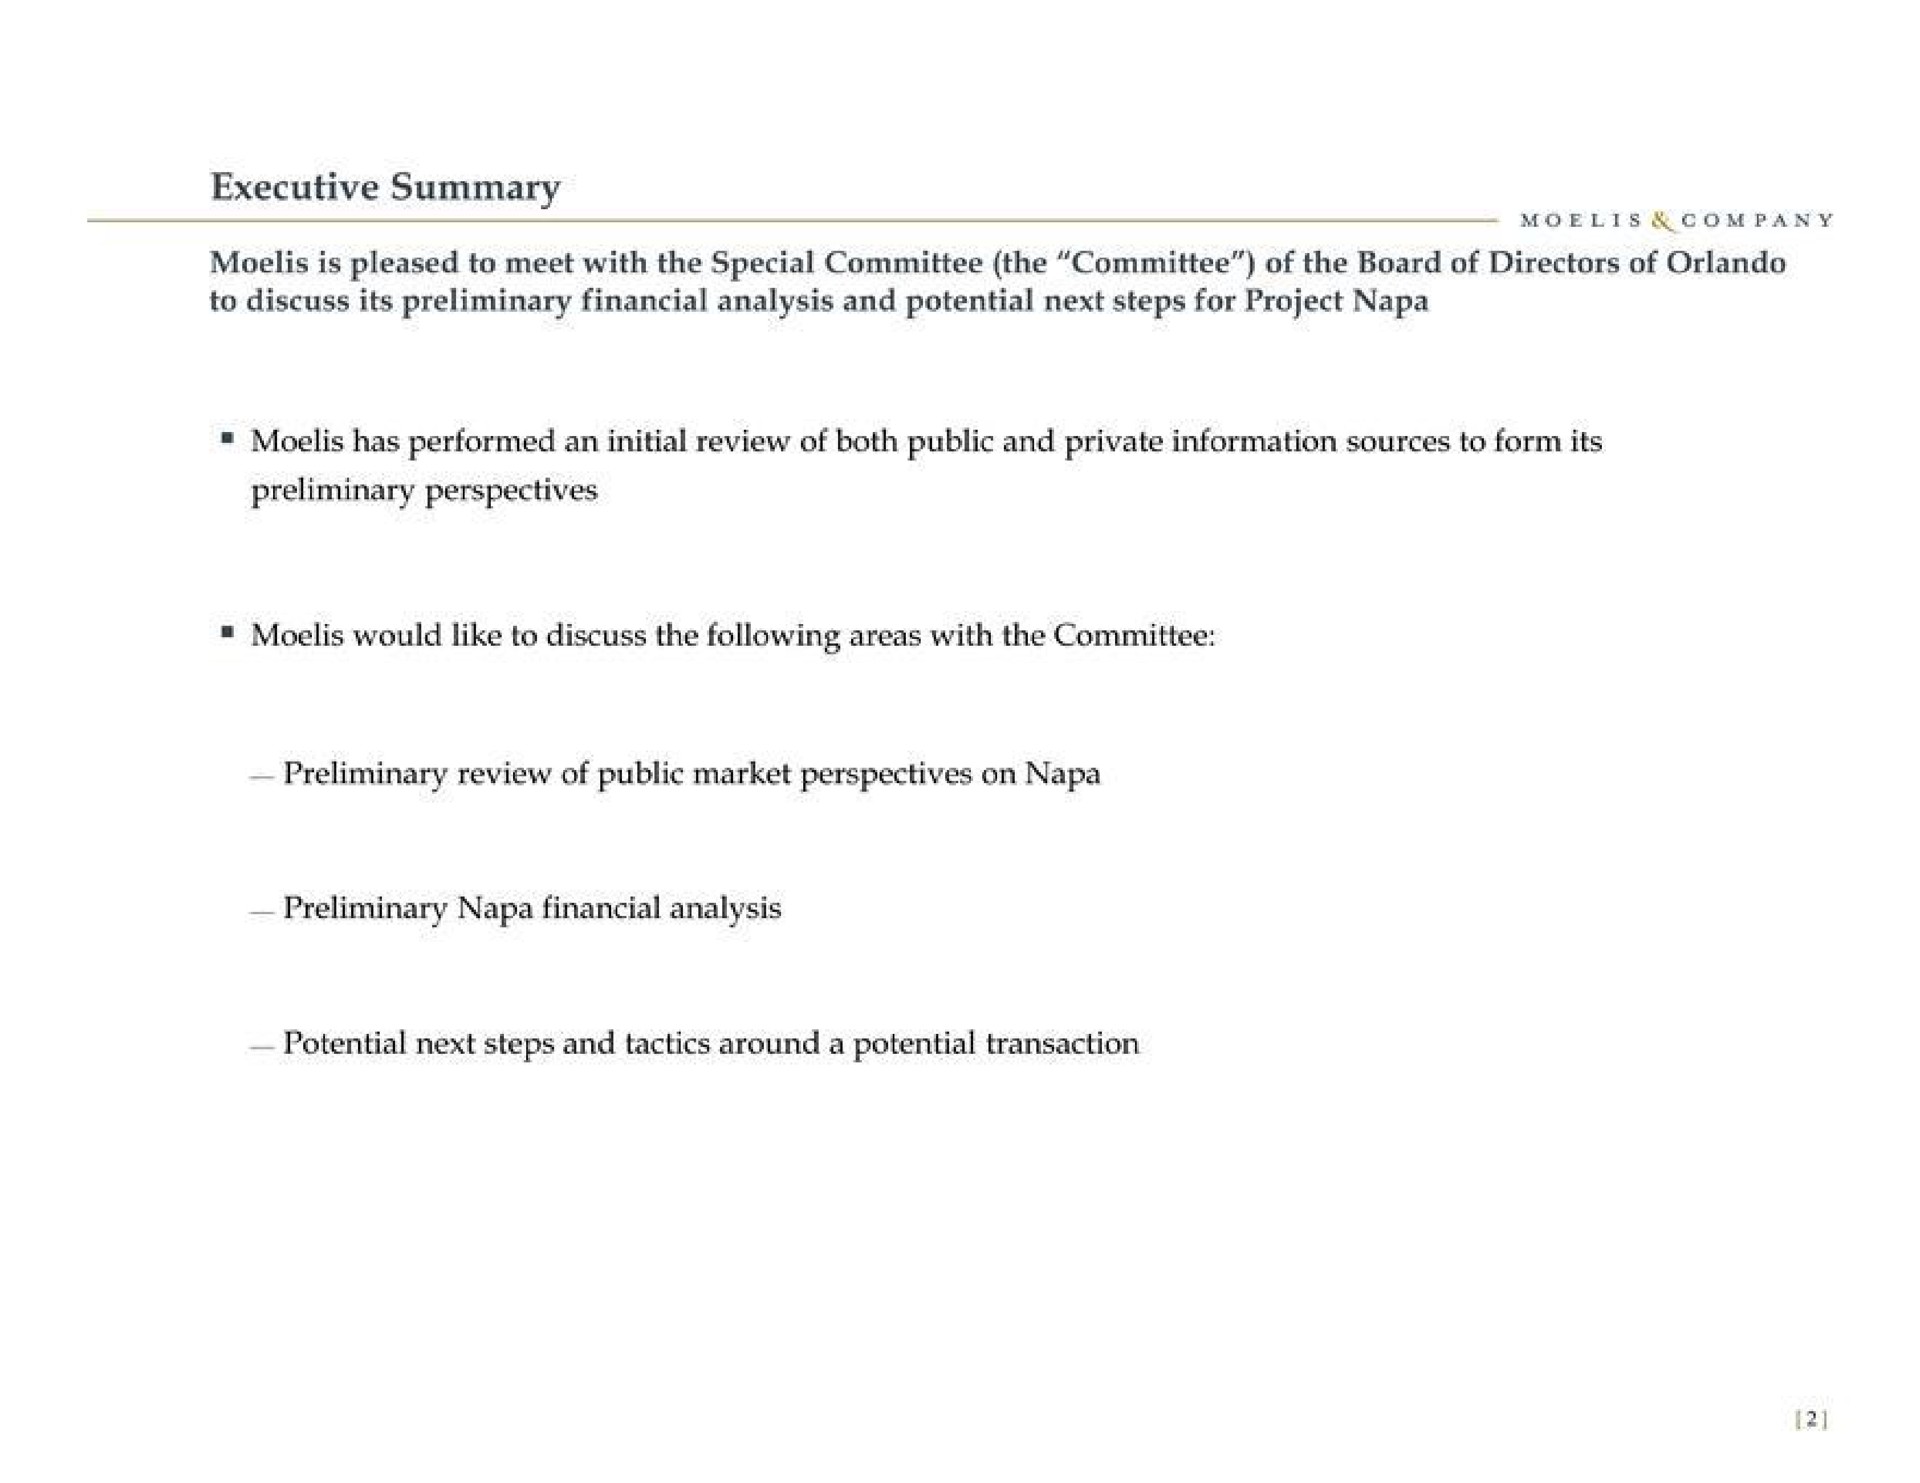 executive summary preliminary perspectives would like to discuss the following areas with the committee preliminary review of public market perspectives on napa preliminary napa financial analysis potential next steps and tactics around a potential transaction | Moelis & Company